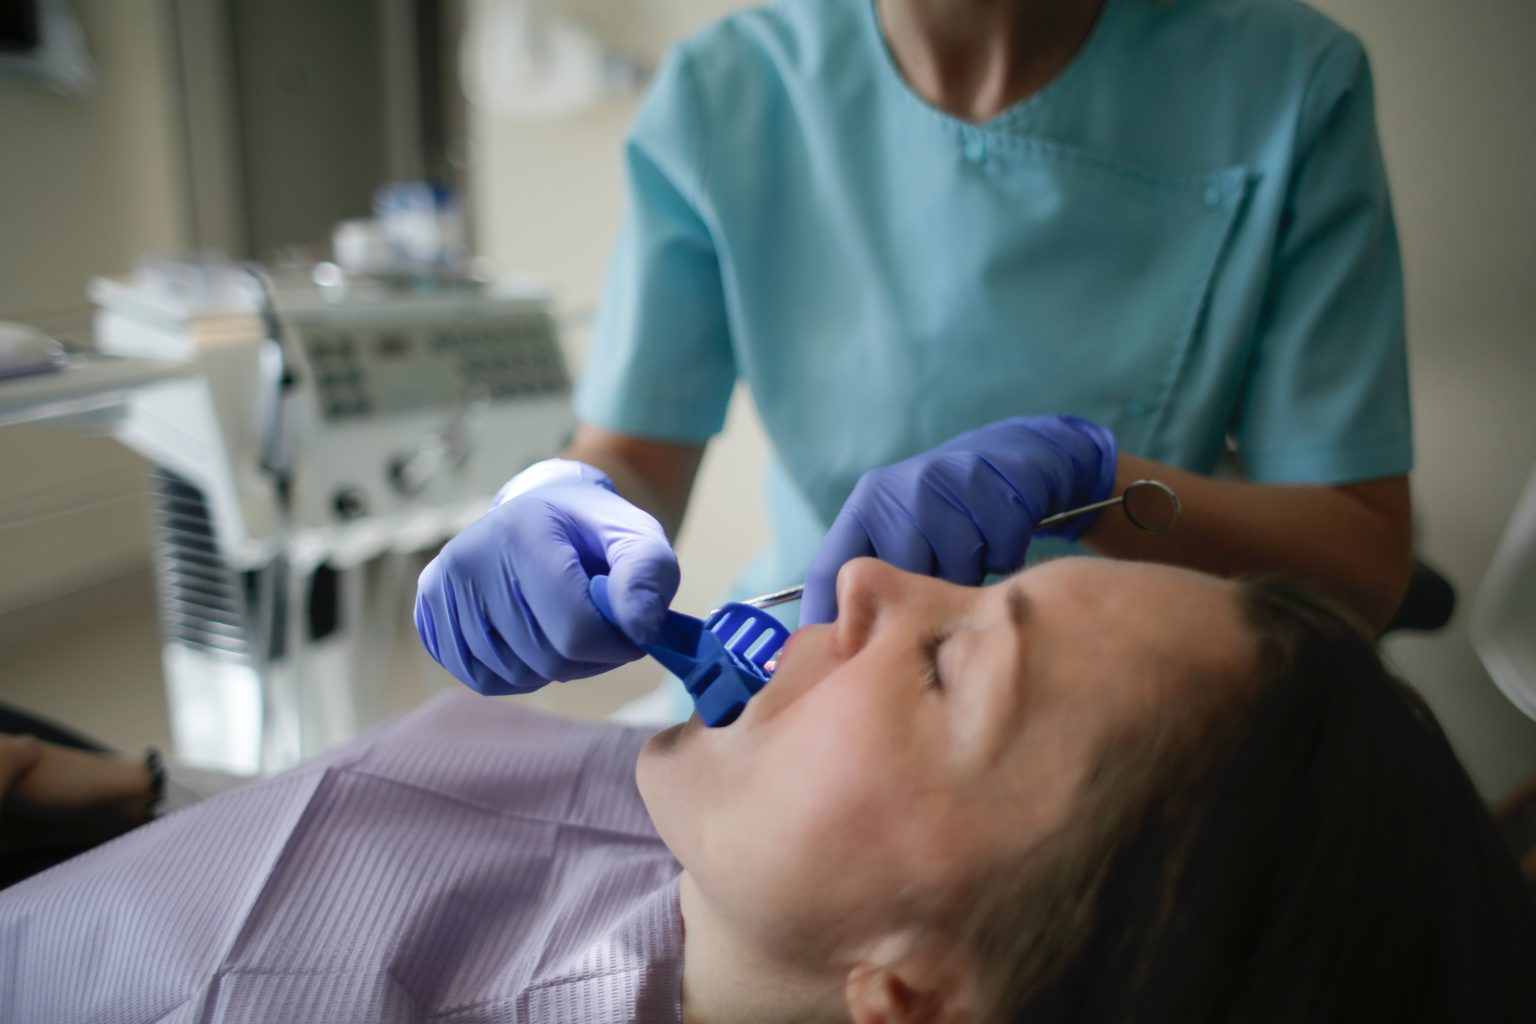 A dental assistant taking a dental impression of a patient’s mouth